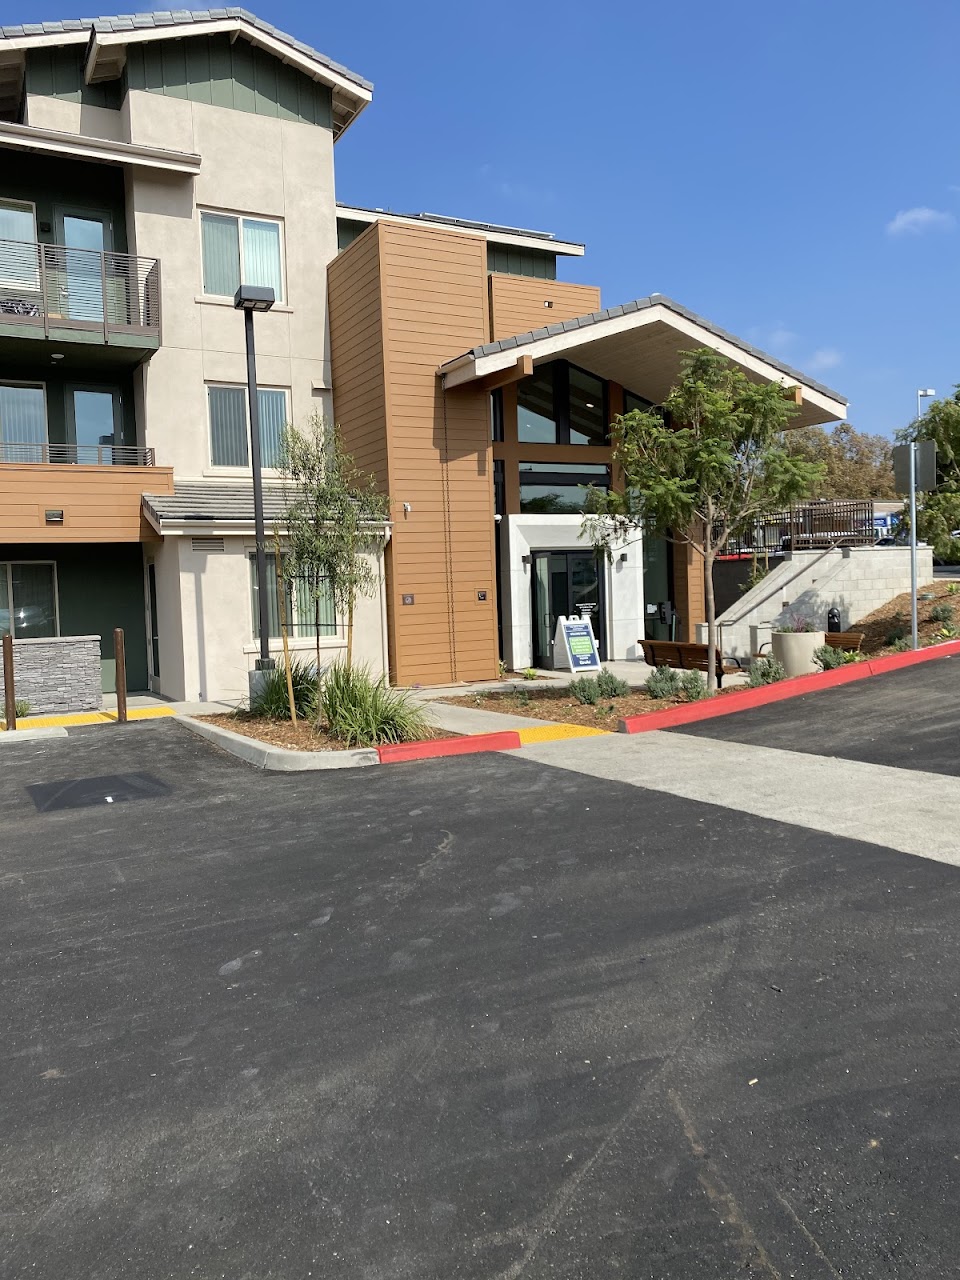 Photo of THE GROVE. Affordable housing located at 815 CIVIC CENTER DRIVE VISTA, CA 92084